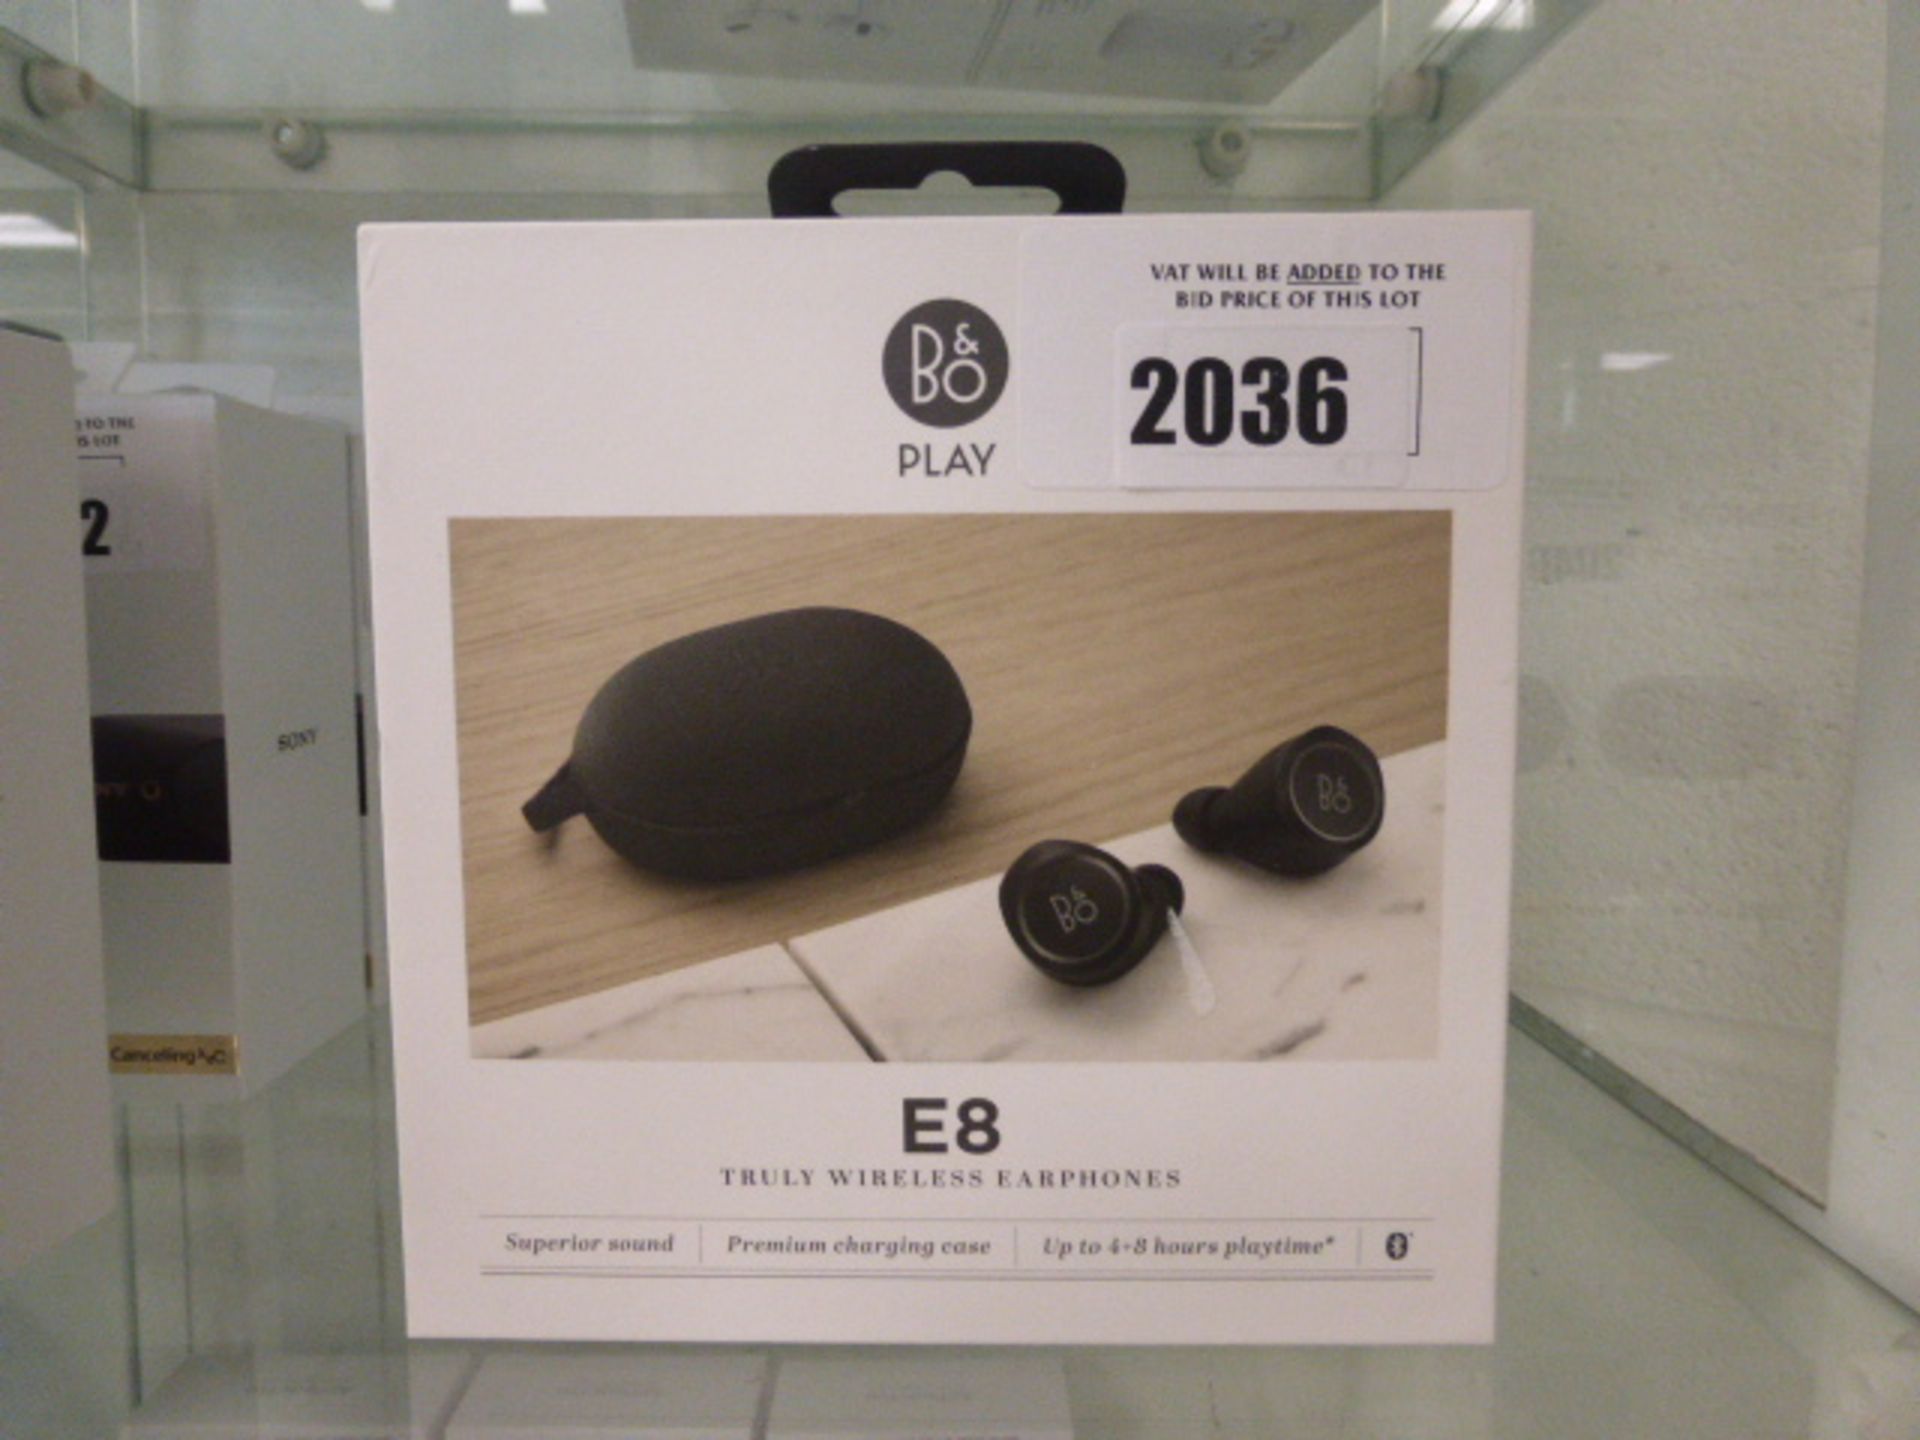 Set of Bang & Olufsen E8 wireless earphones with charging case and box - Image 2 of 2